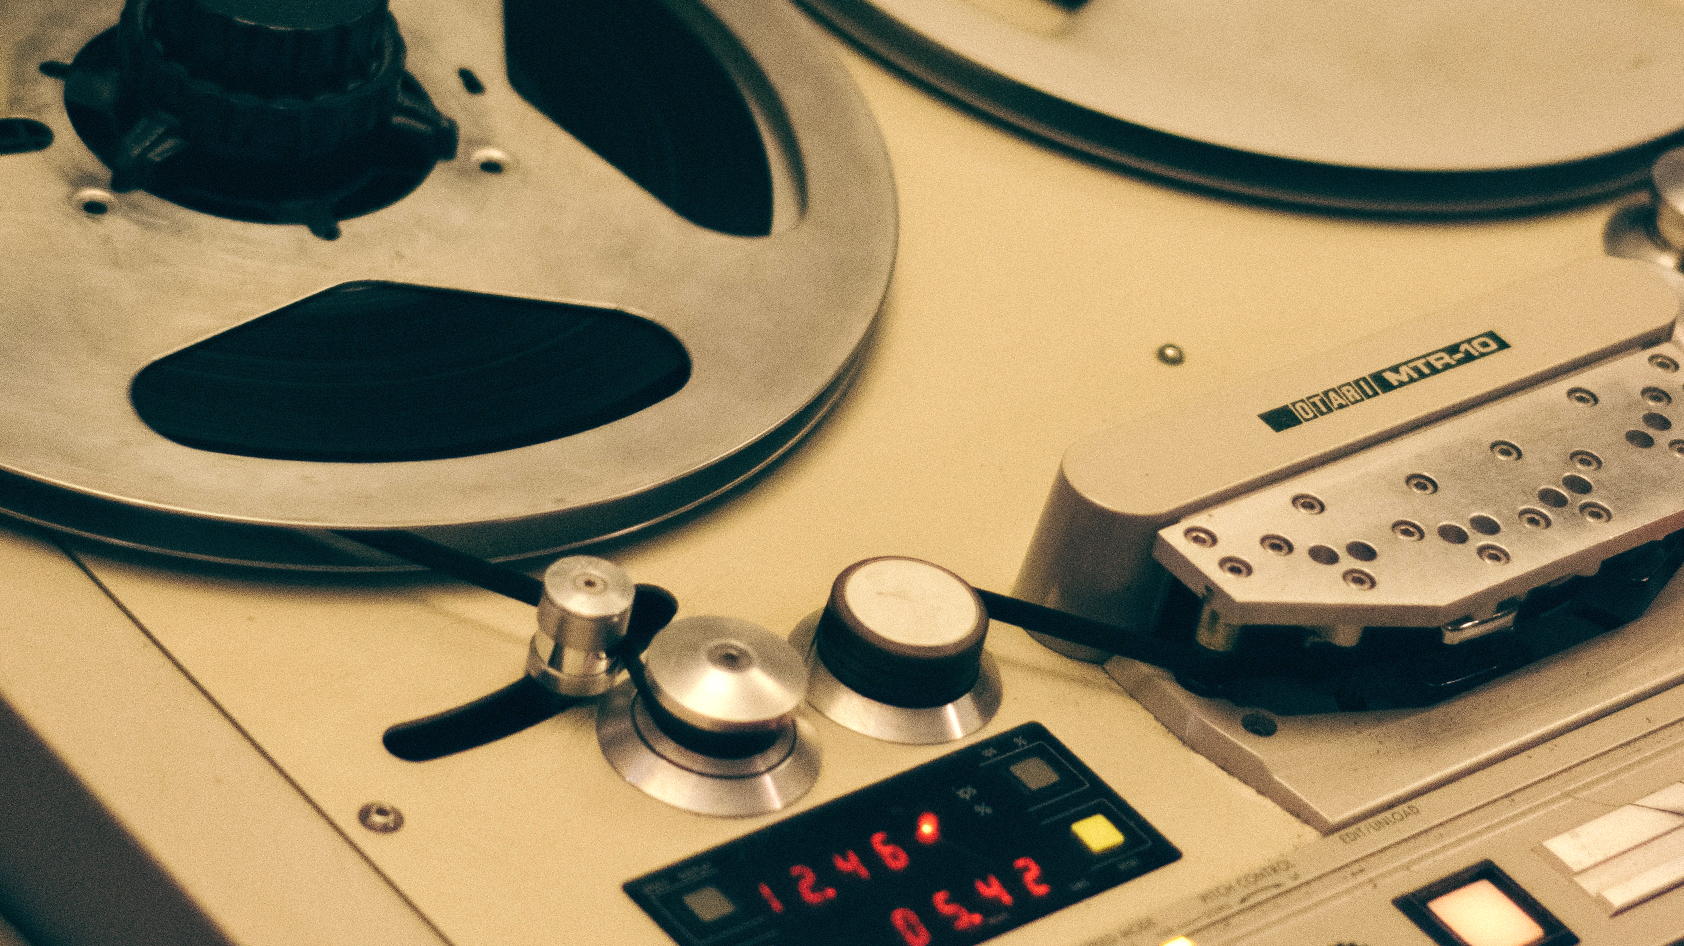 A close up of a reel to reel tape machine showing the display and tape.